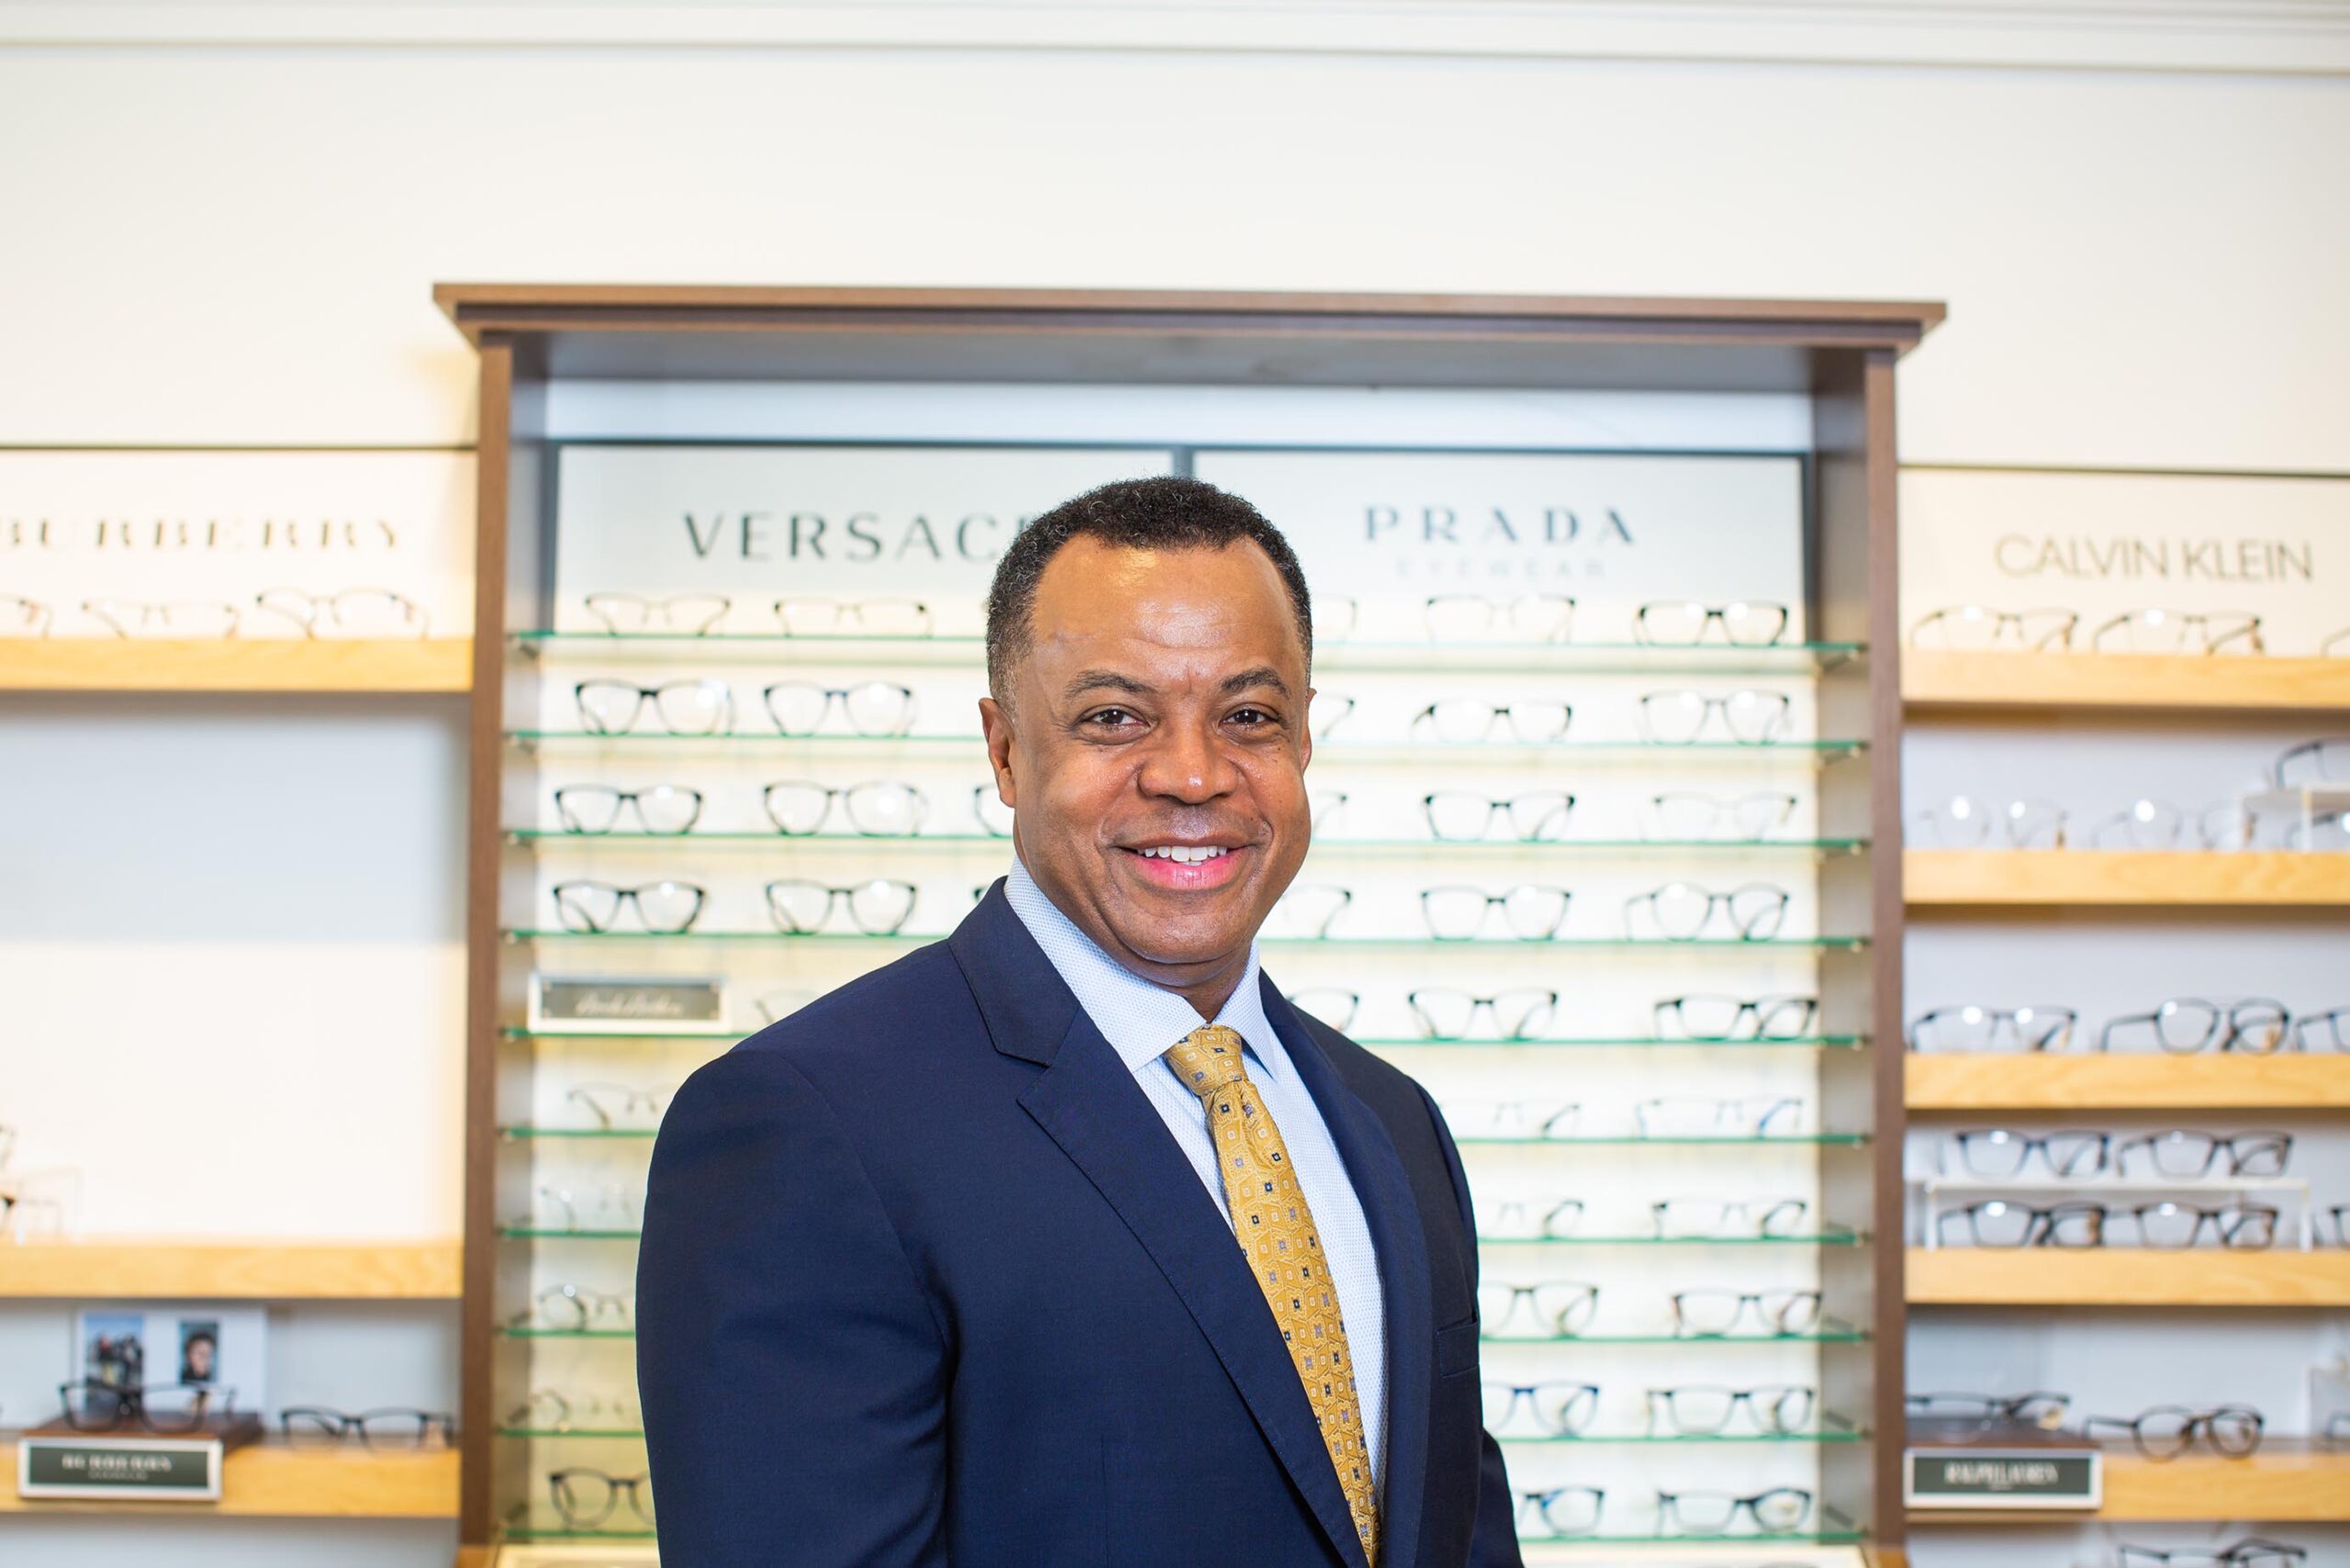 60-Unit Franchisee Bill Noble Shares Pearle Vision Journey